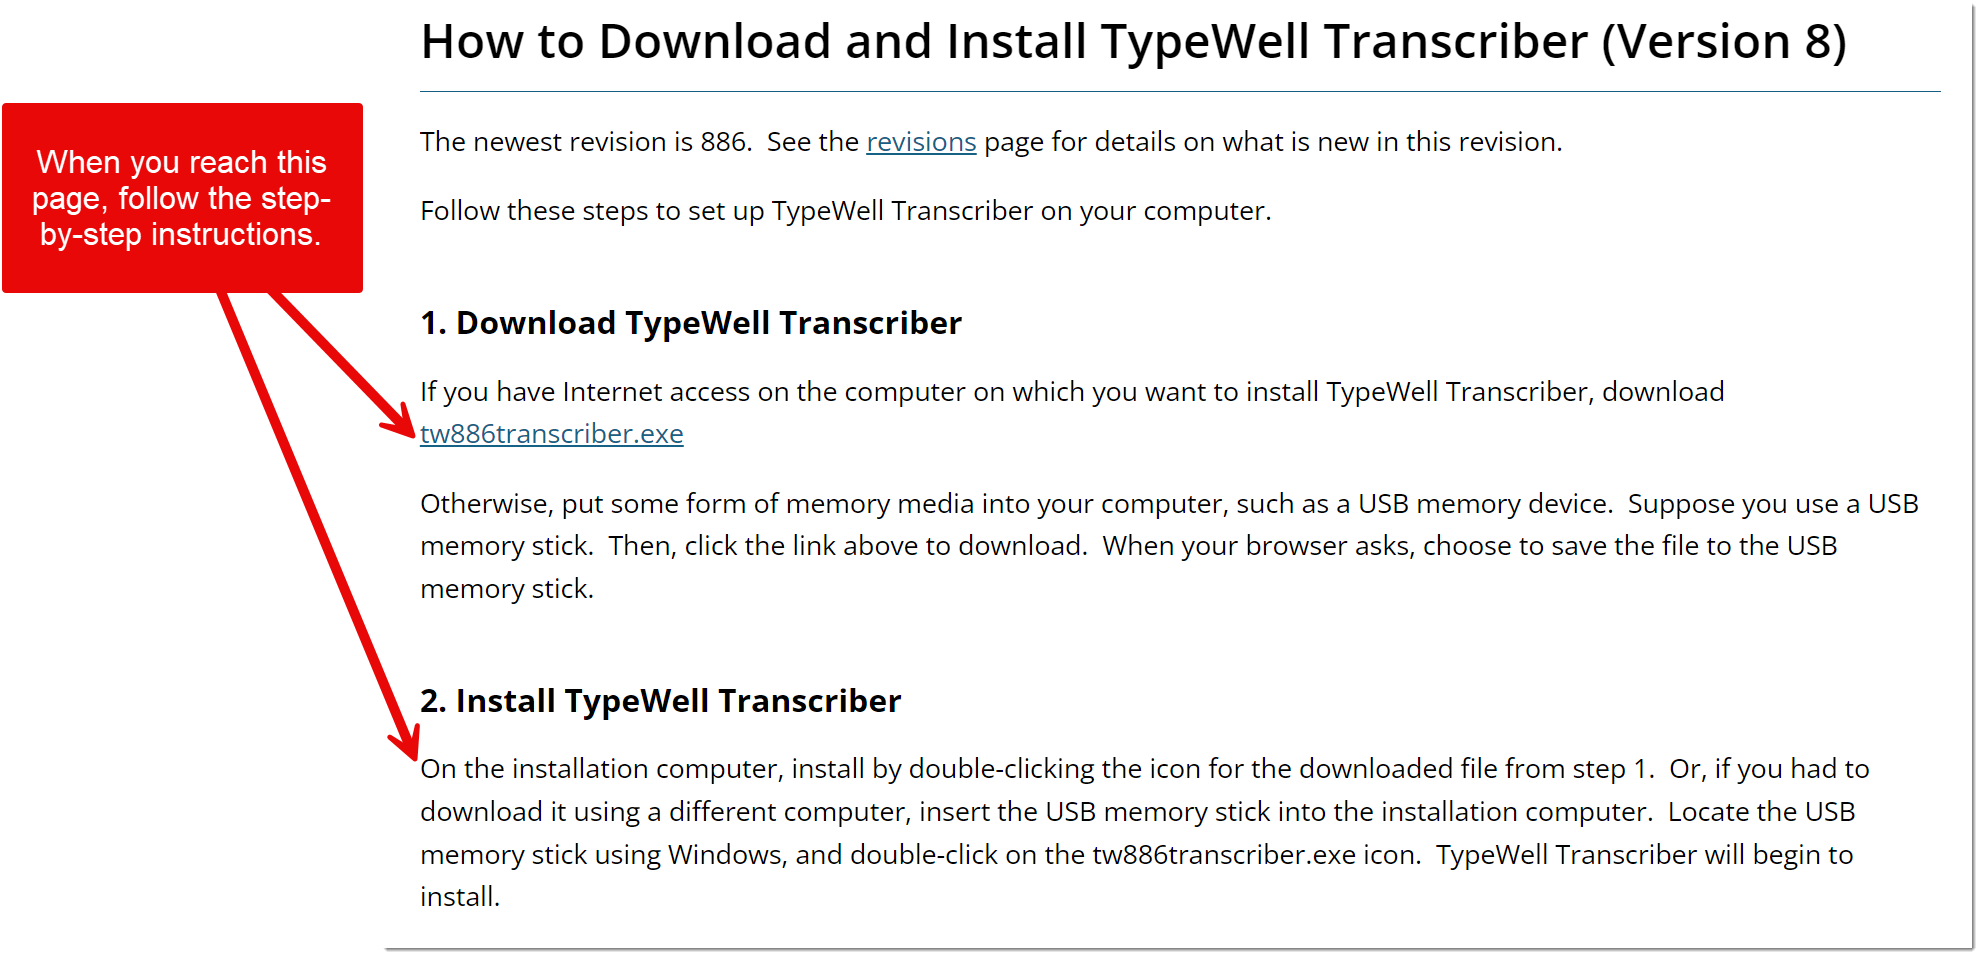 V8 Transcriber - How to Download and Install.png